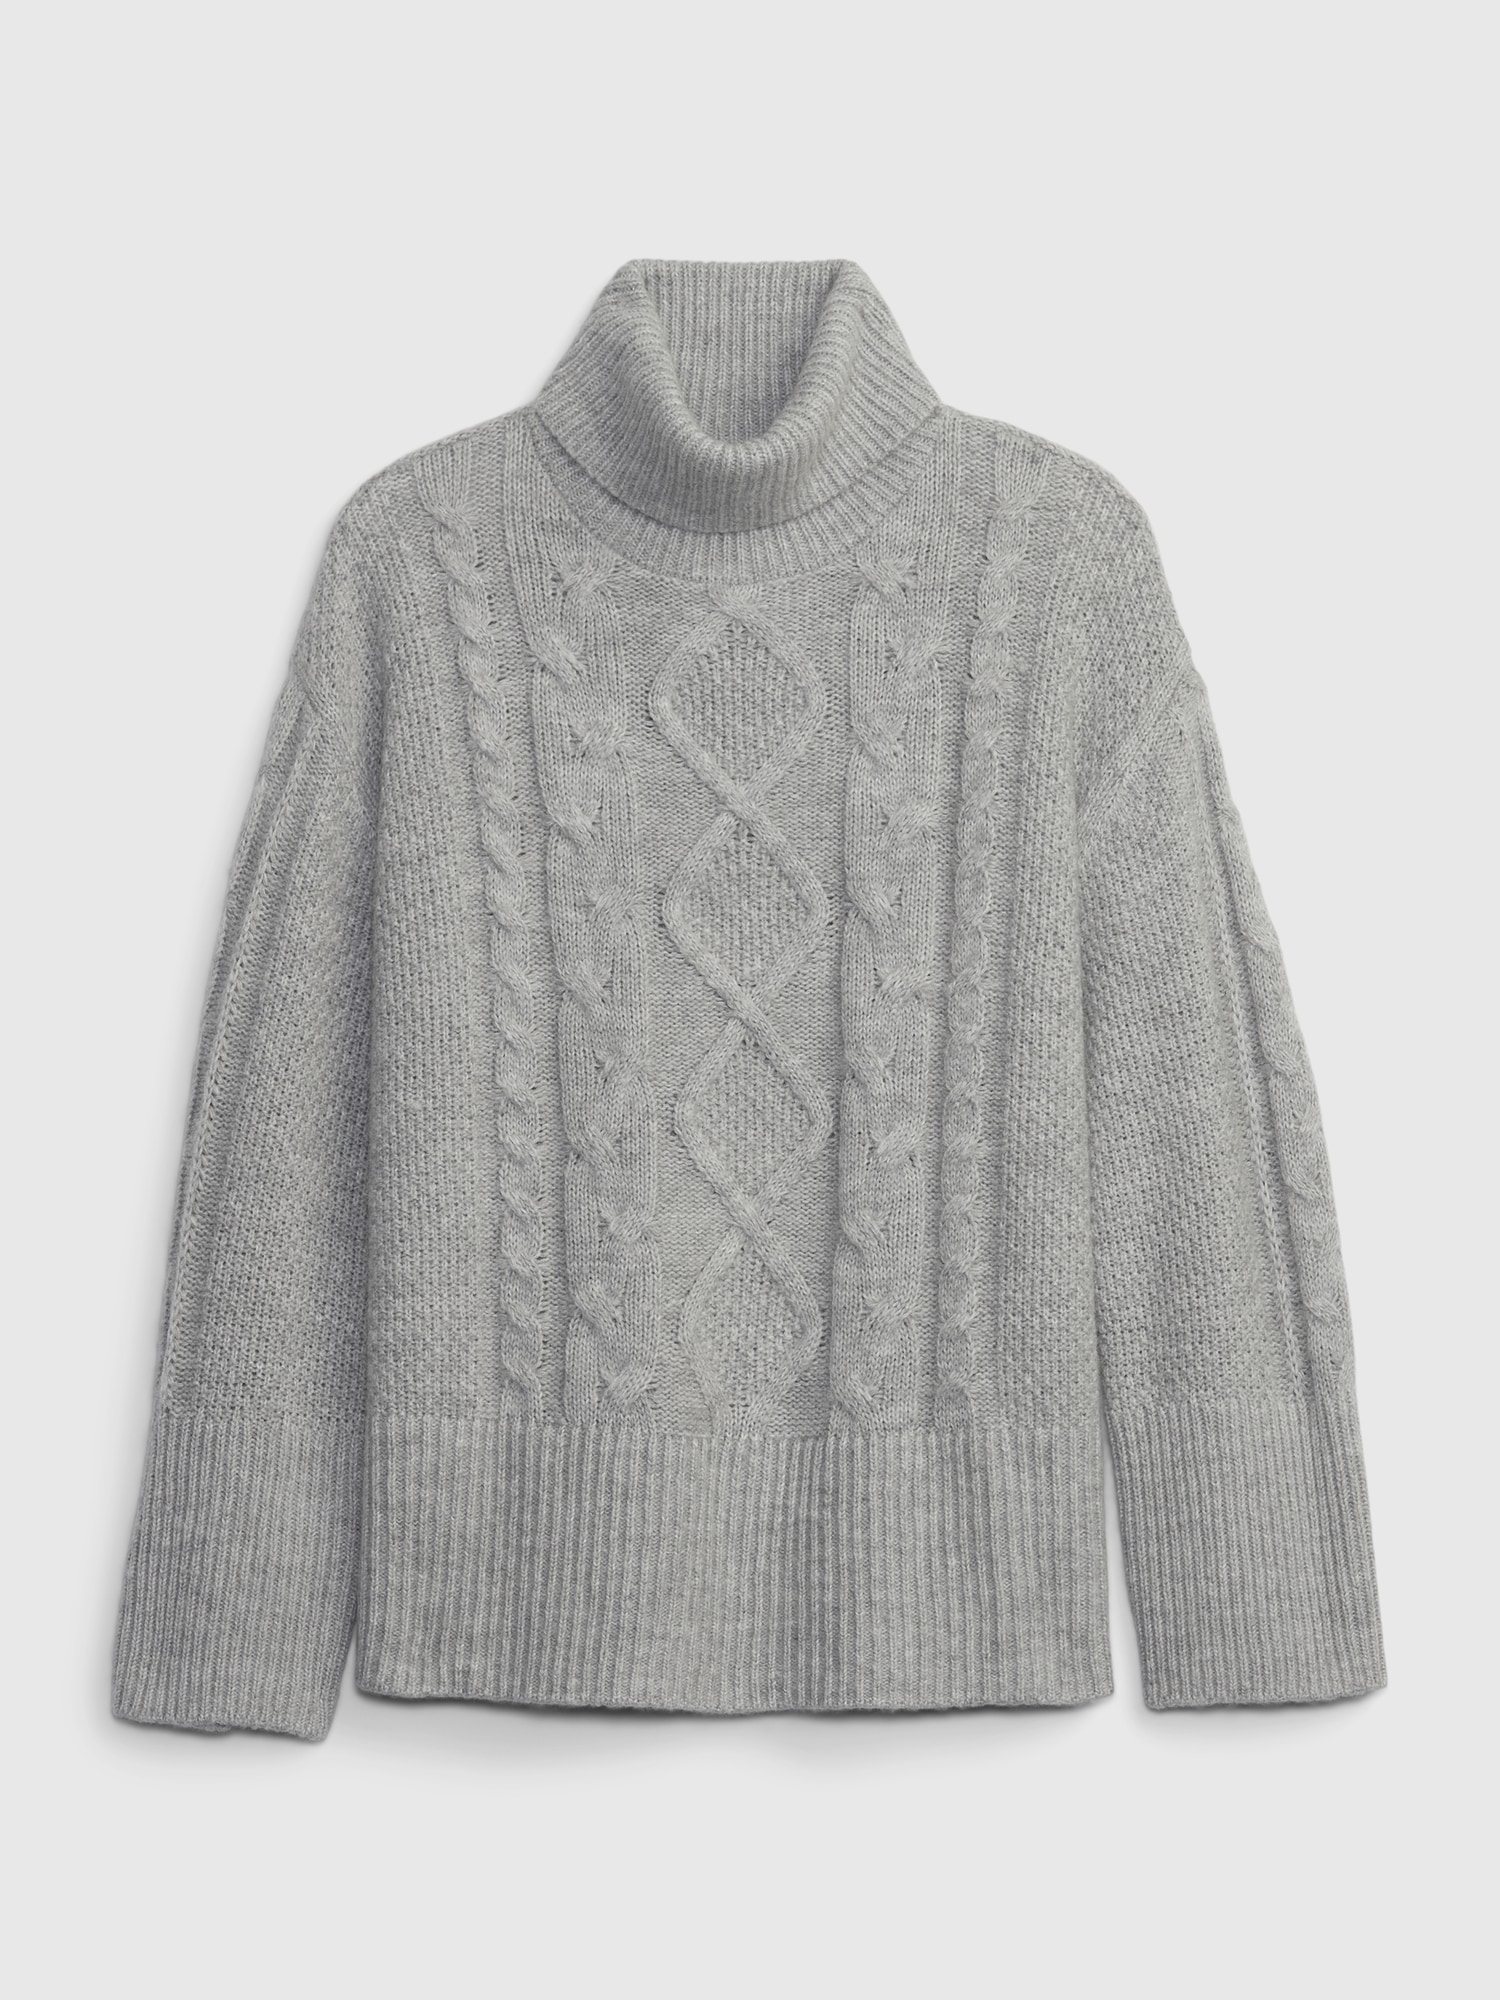 This  Knit Sweater With 6,600+ 5-Star Reviews Is on Sale